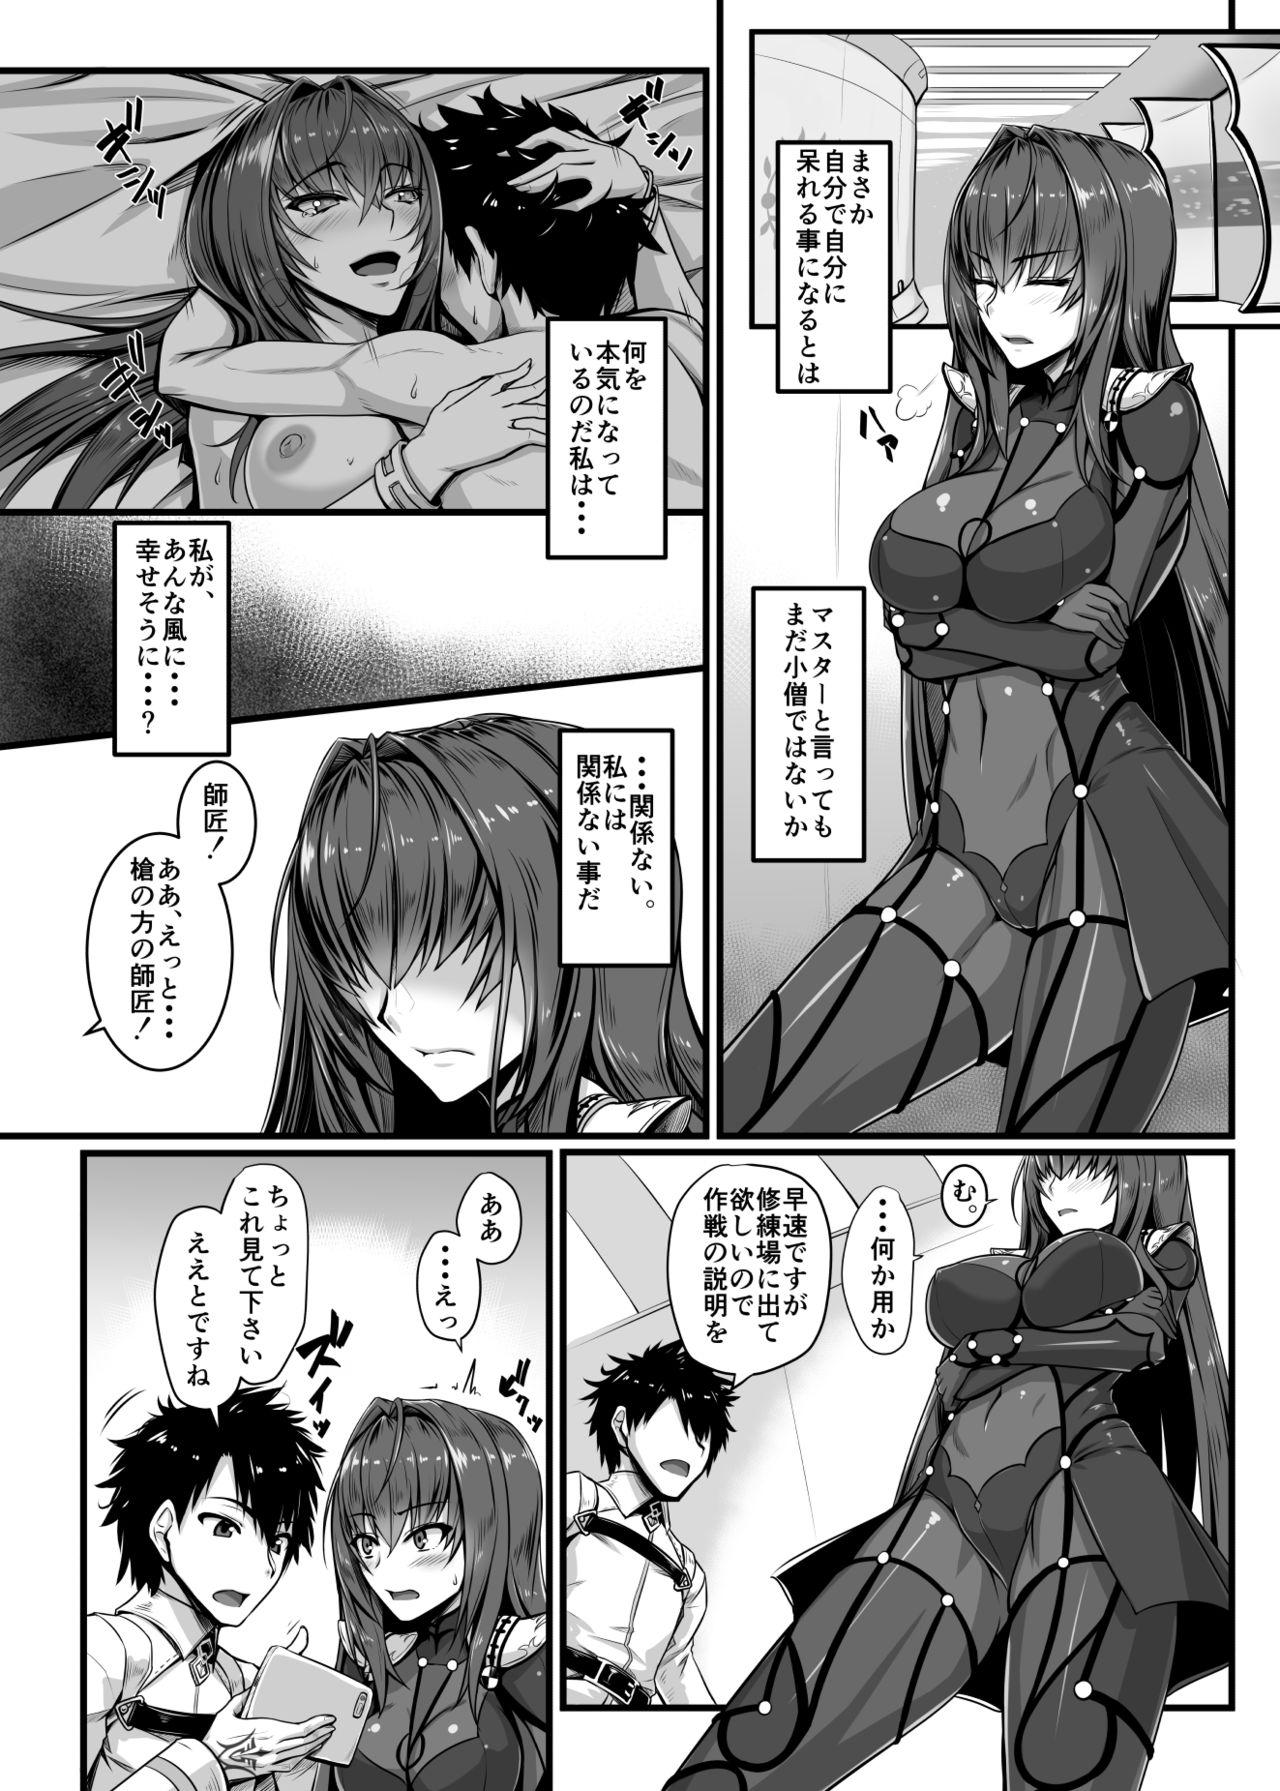 Ngentot SSWX - Fate grand order Holes - Page 4